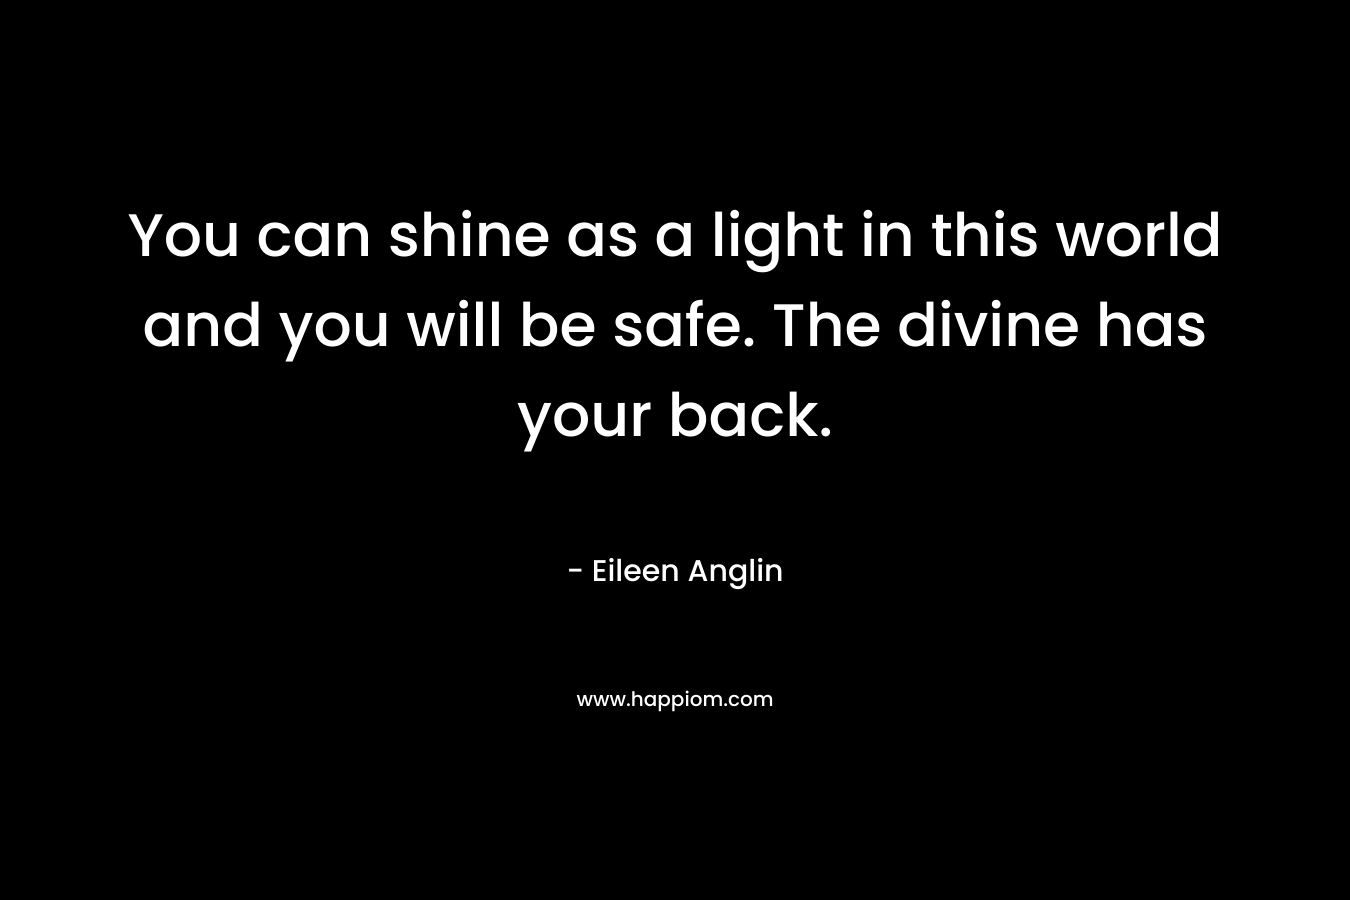 You can shine as a light in this world and you will be safe. The divine has your back.